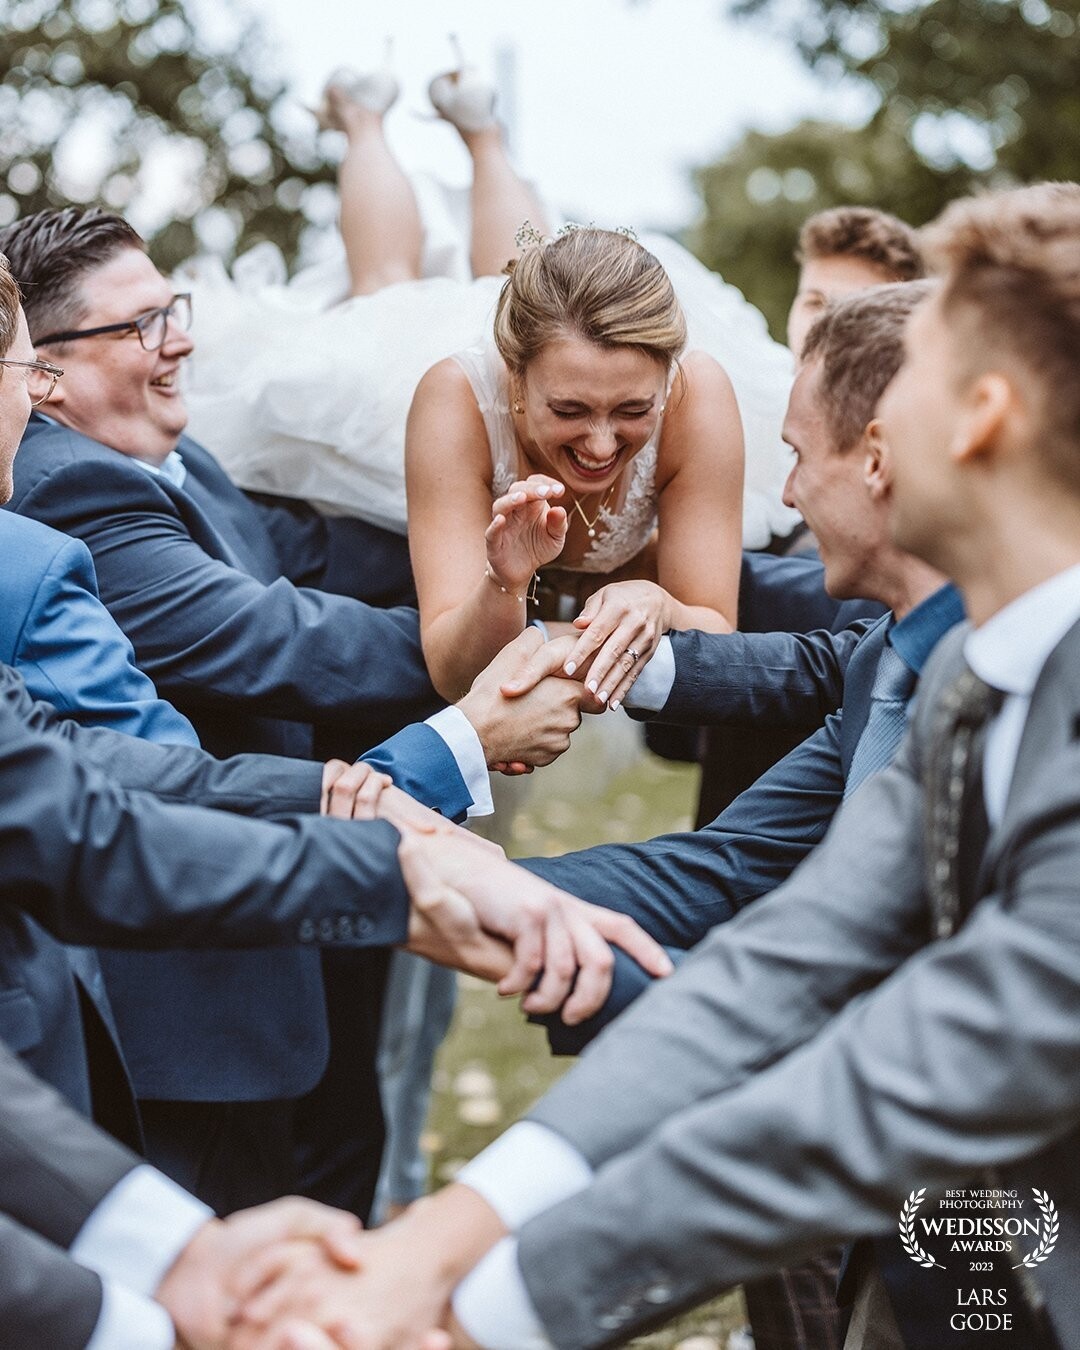 Occasionally we see these pictures where the groom is thrown into the air by the groomsmen and friends. How this happens to the bride, however, we rarely see. Lara from Canada had had so much fun doing it - albeit a lot of respect.